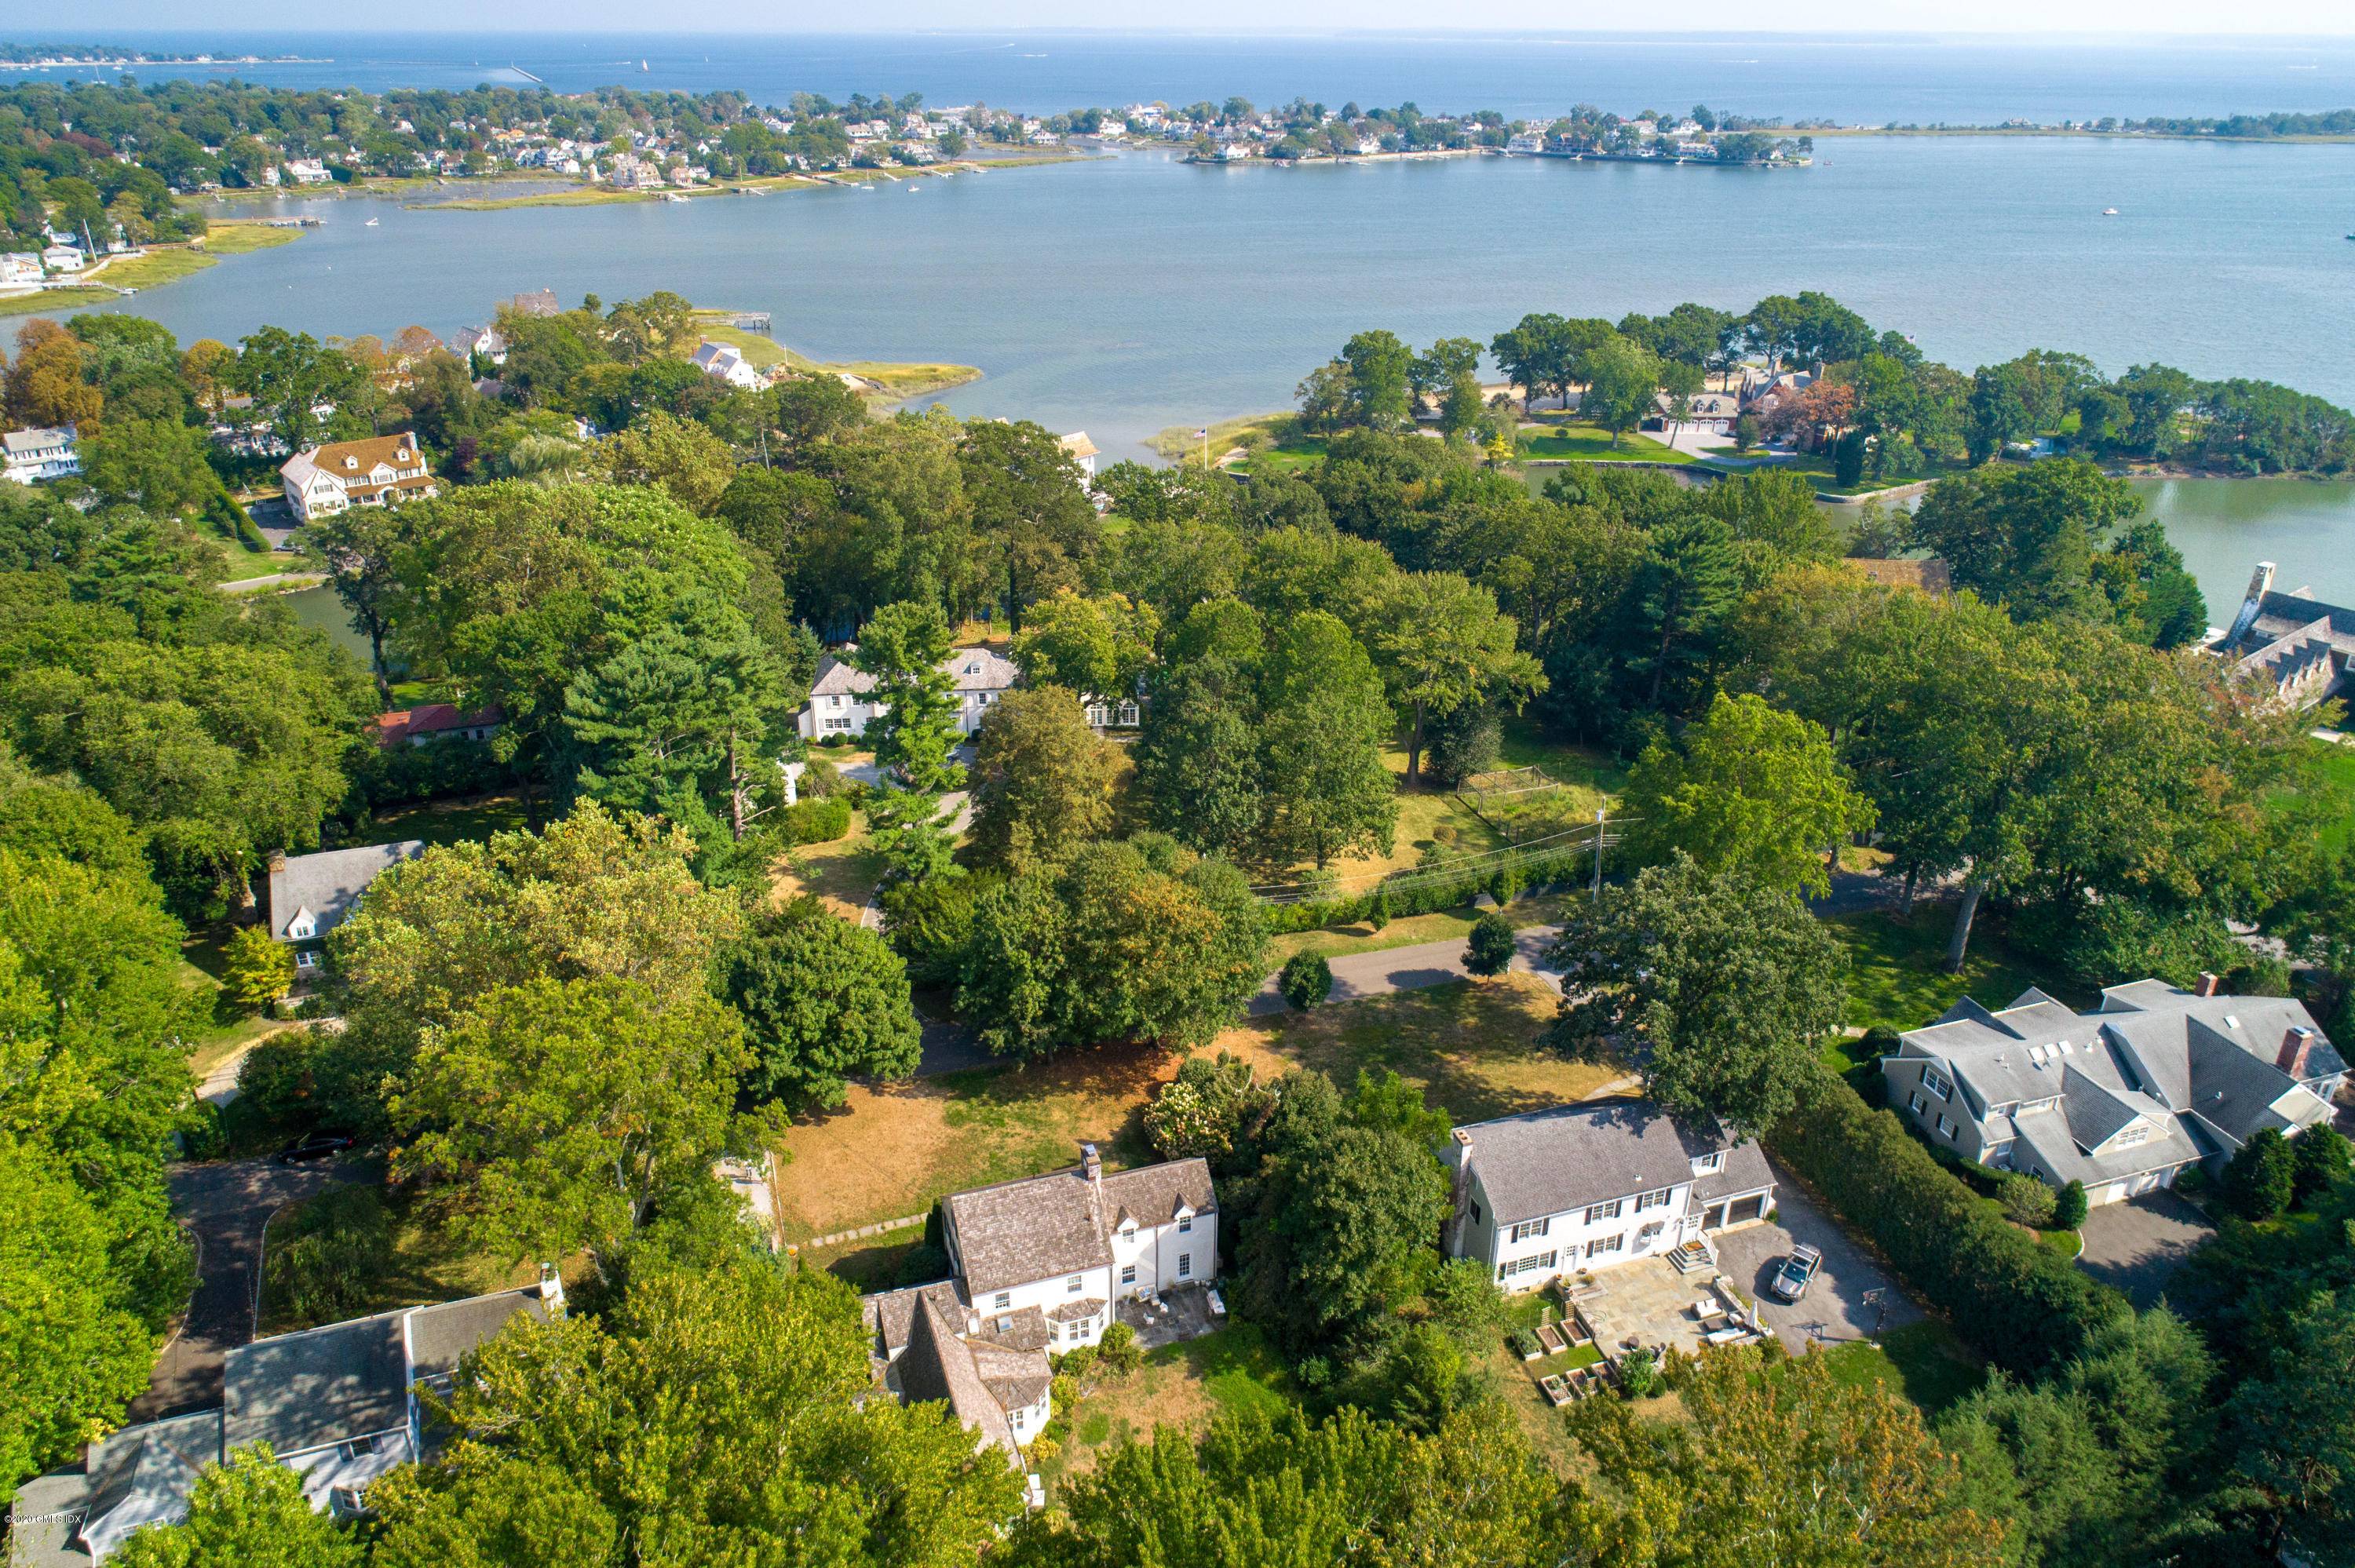 Fabulous location at the end of coveted Meadow Road with deeded access to the private Willowmere Association beach and dock.